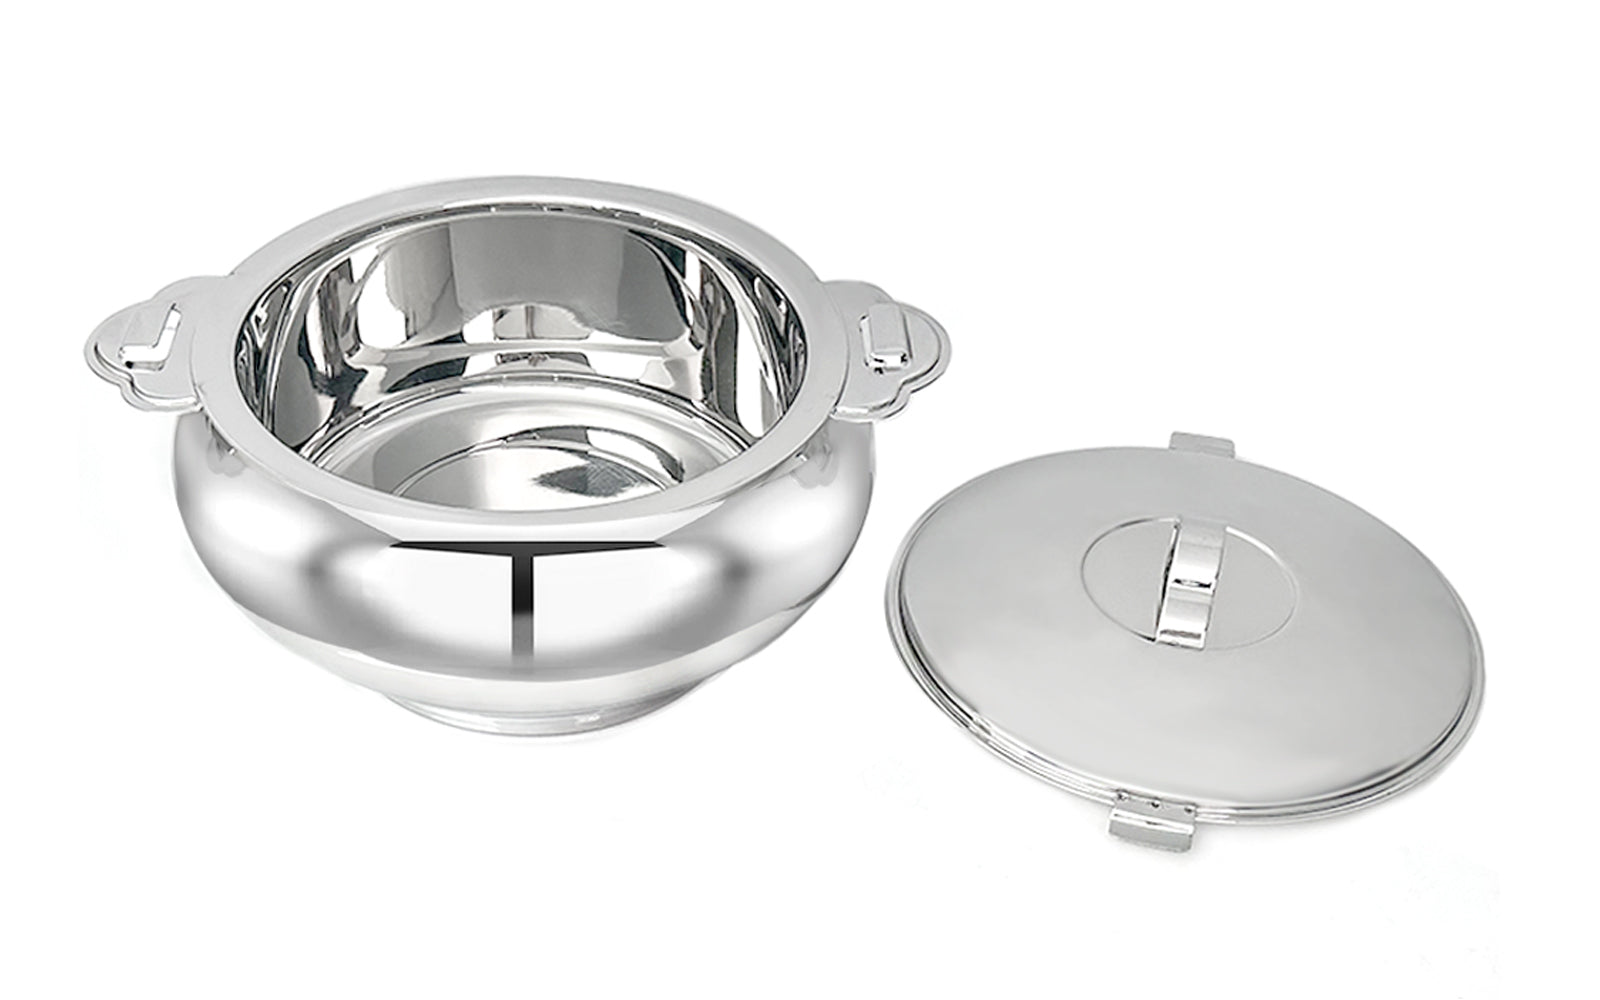 Pradeep Pearl Stainless Steel Insulated Serving Casserole, 1-Piece, Silver